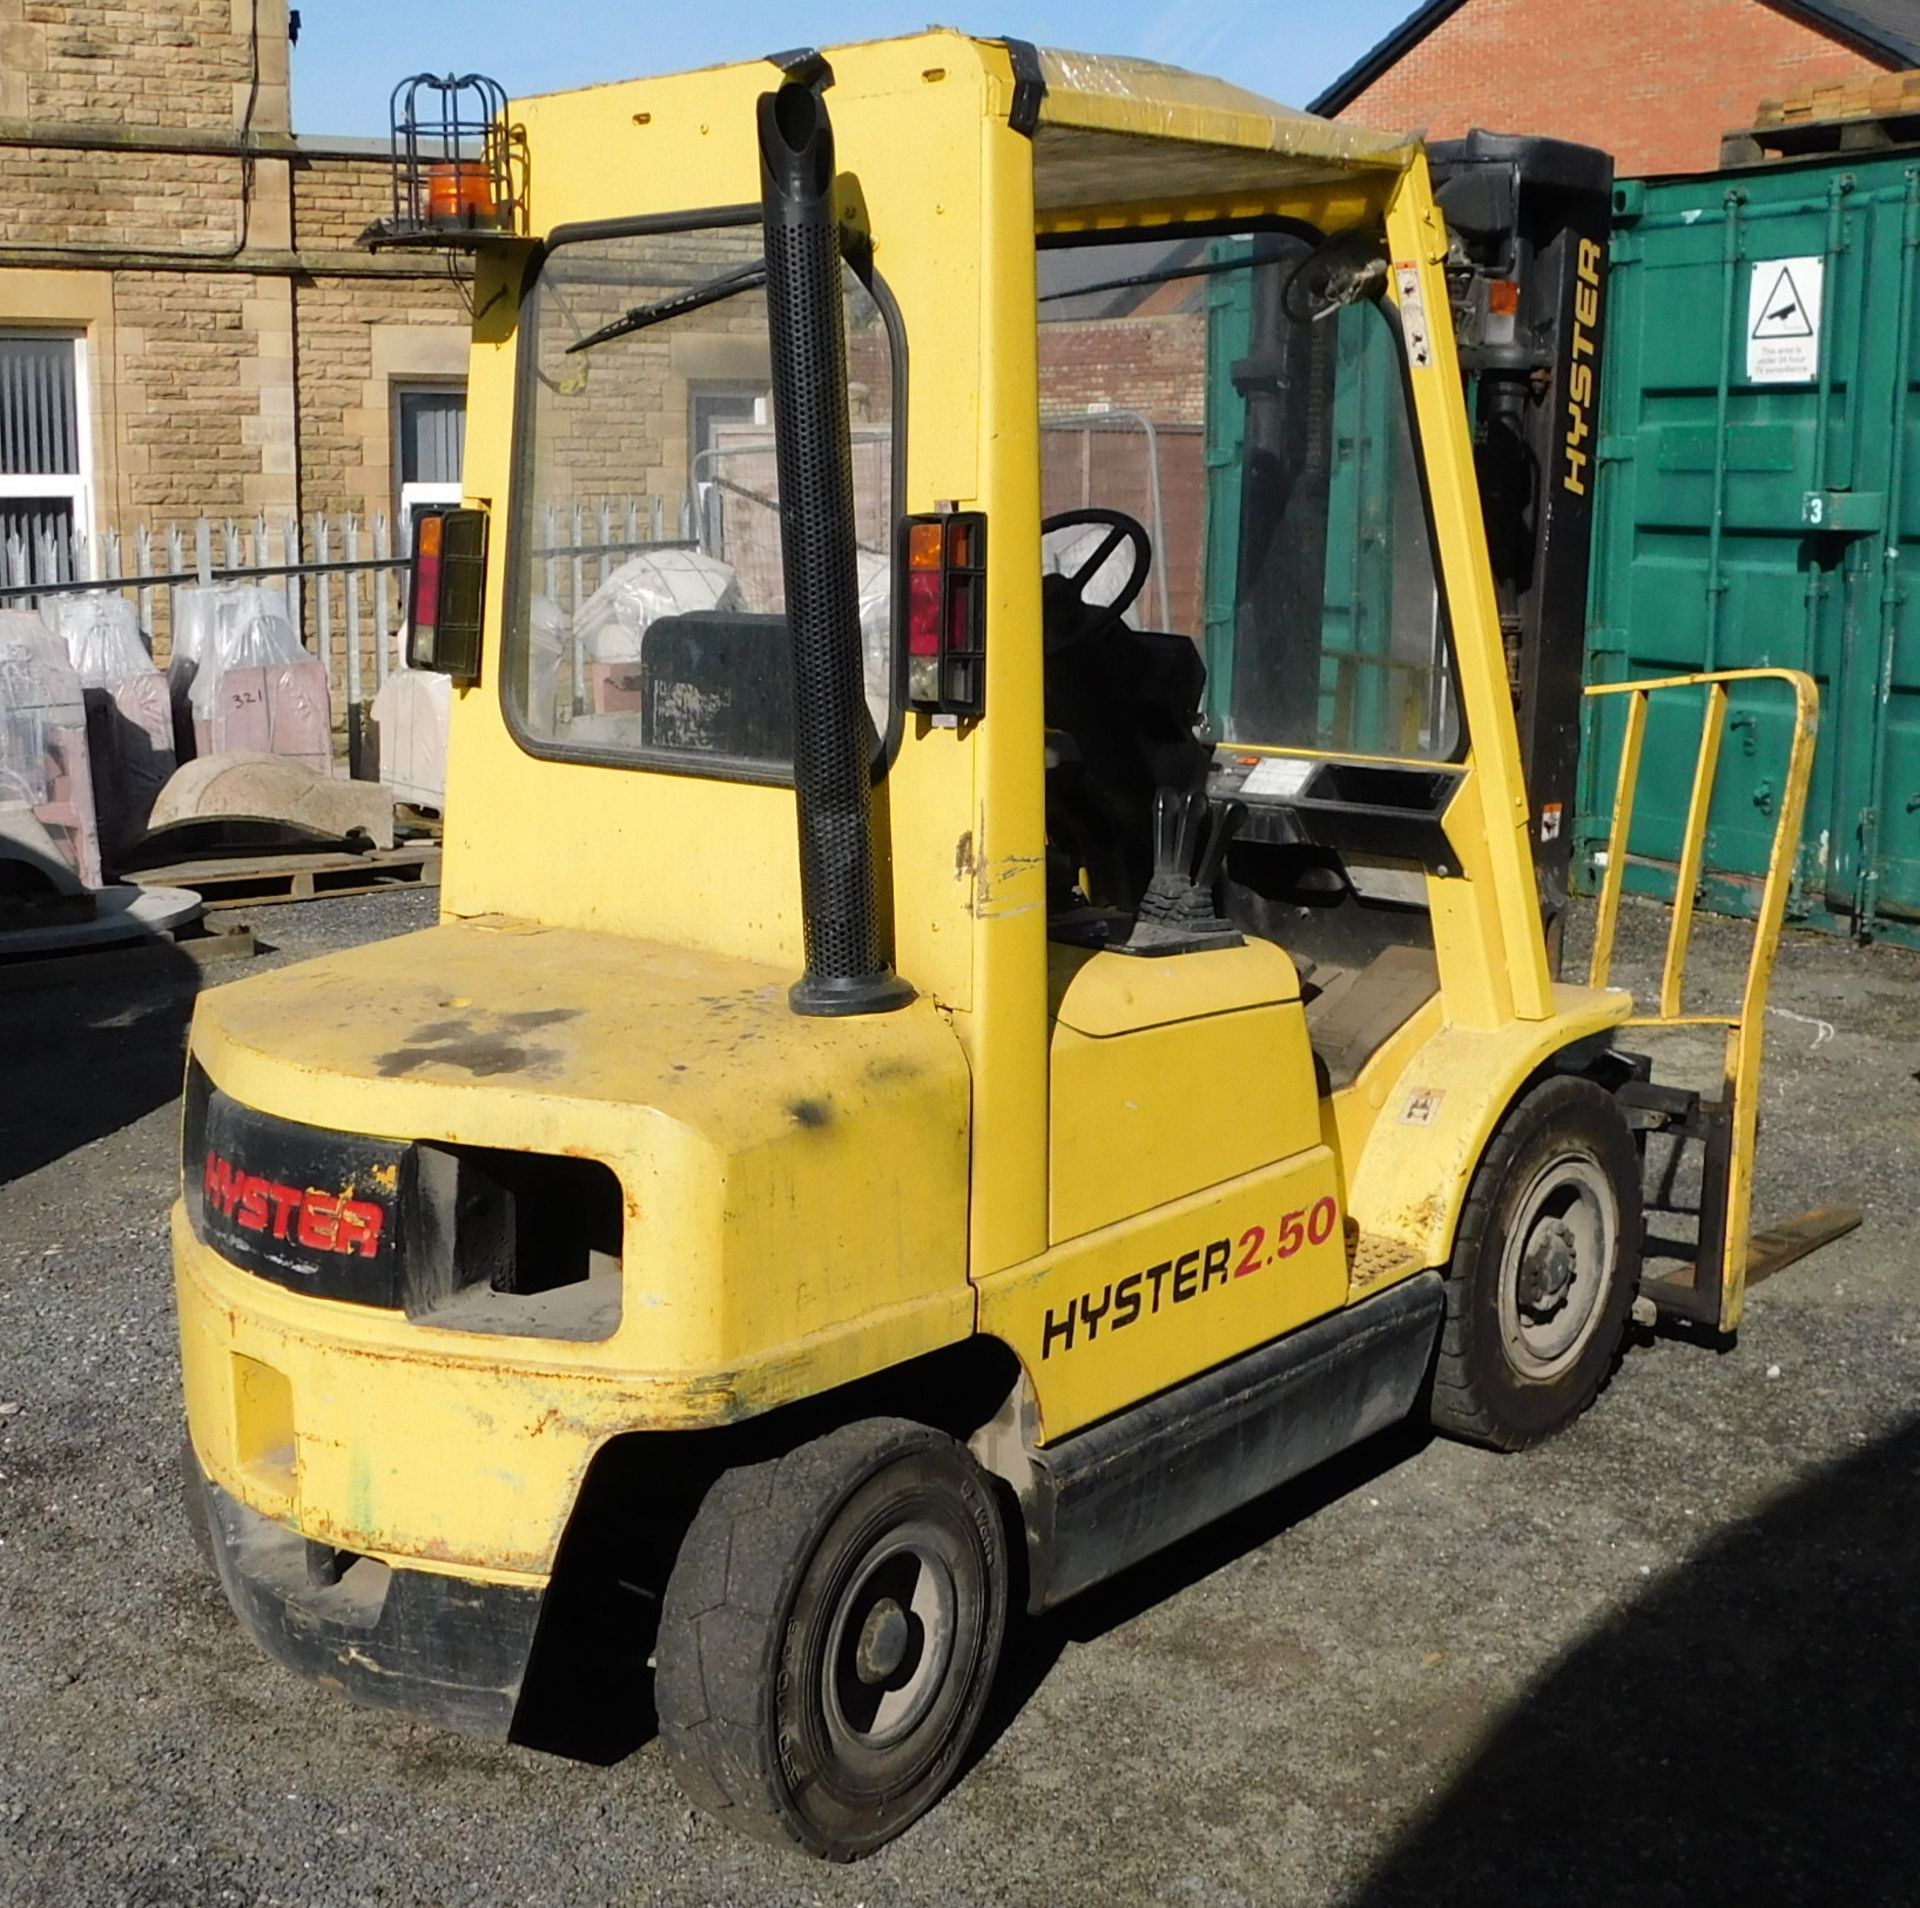 Hyster H2.50XM Diesel Forklift, H177B32597Z (2002), Capacity 2.5t (Collection Thursday 23rd May – - Image 3 of 7